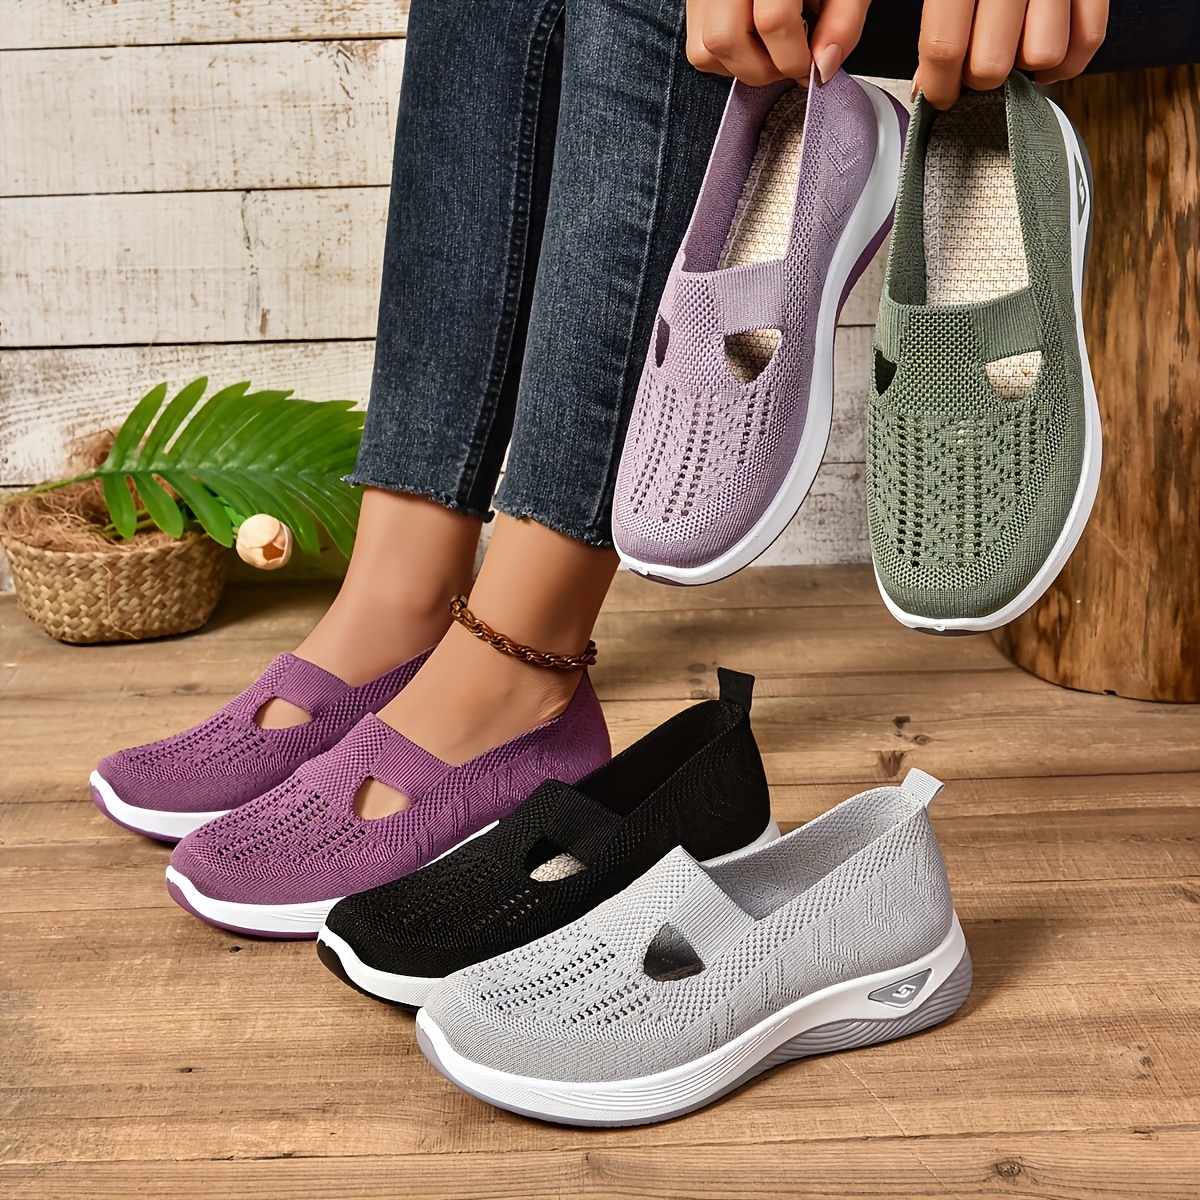 

Women's Casual Fashion Sneakers - Solid Color Fabric Upper Low Top Slip-on Walking Shoes With Pvc Sole, Comfort All-season Breathable Plain Toe Design